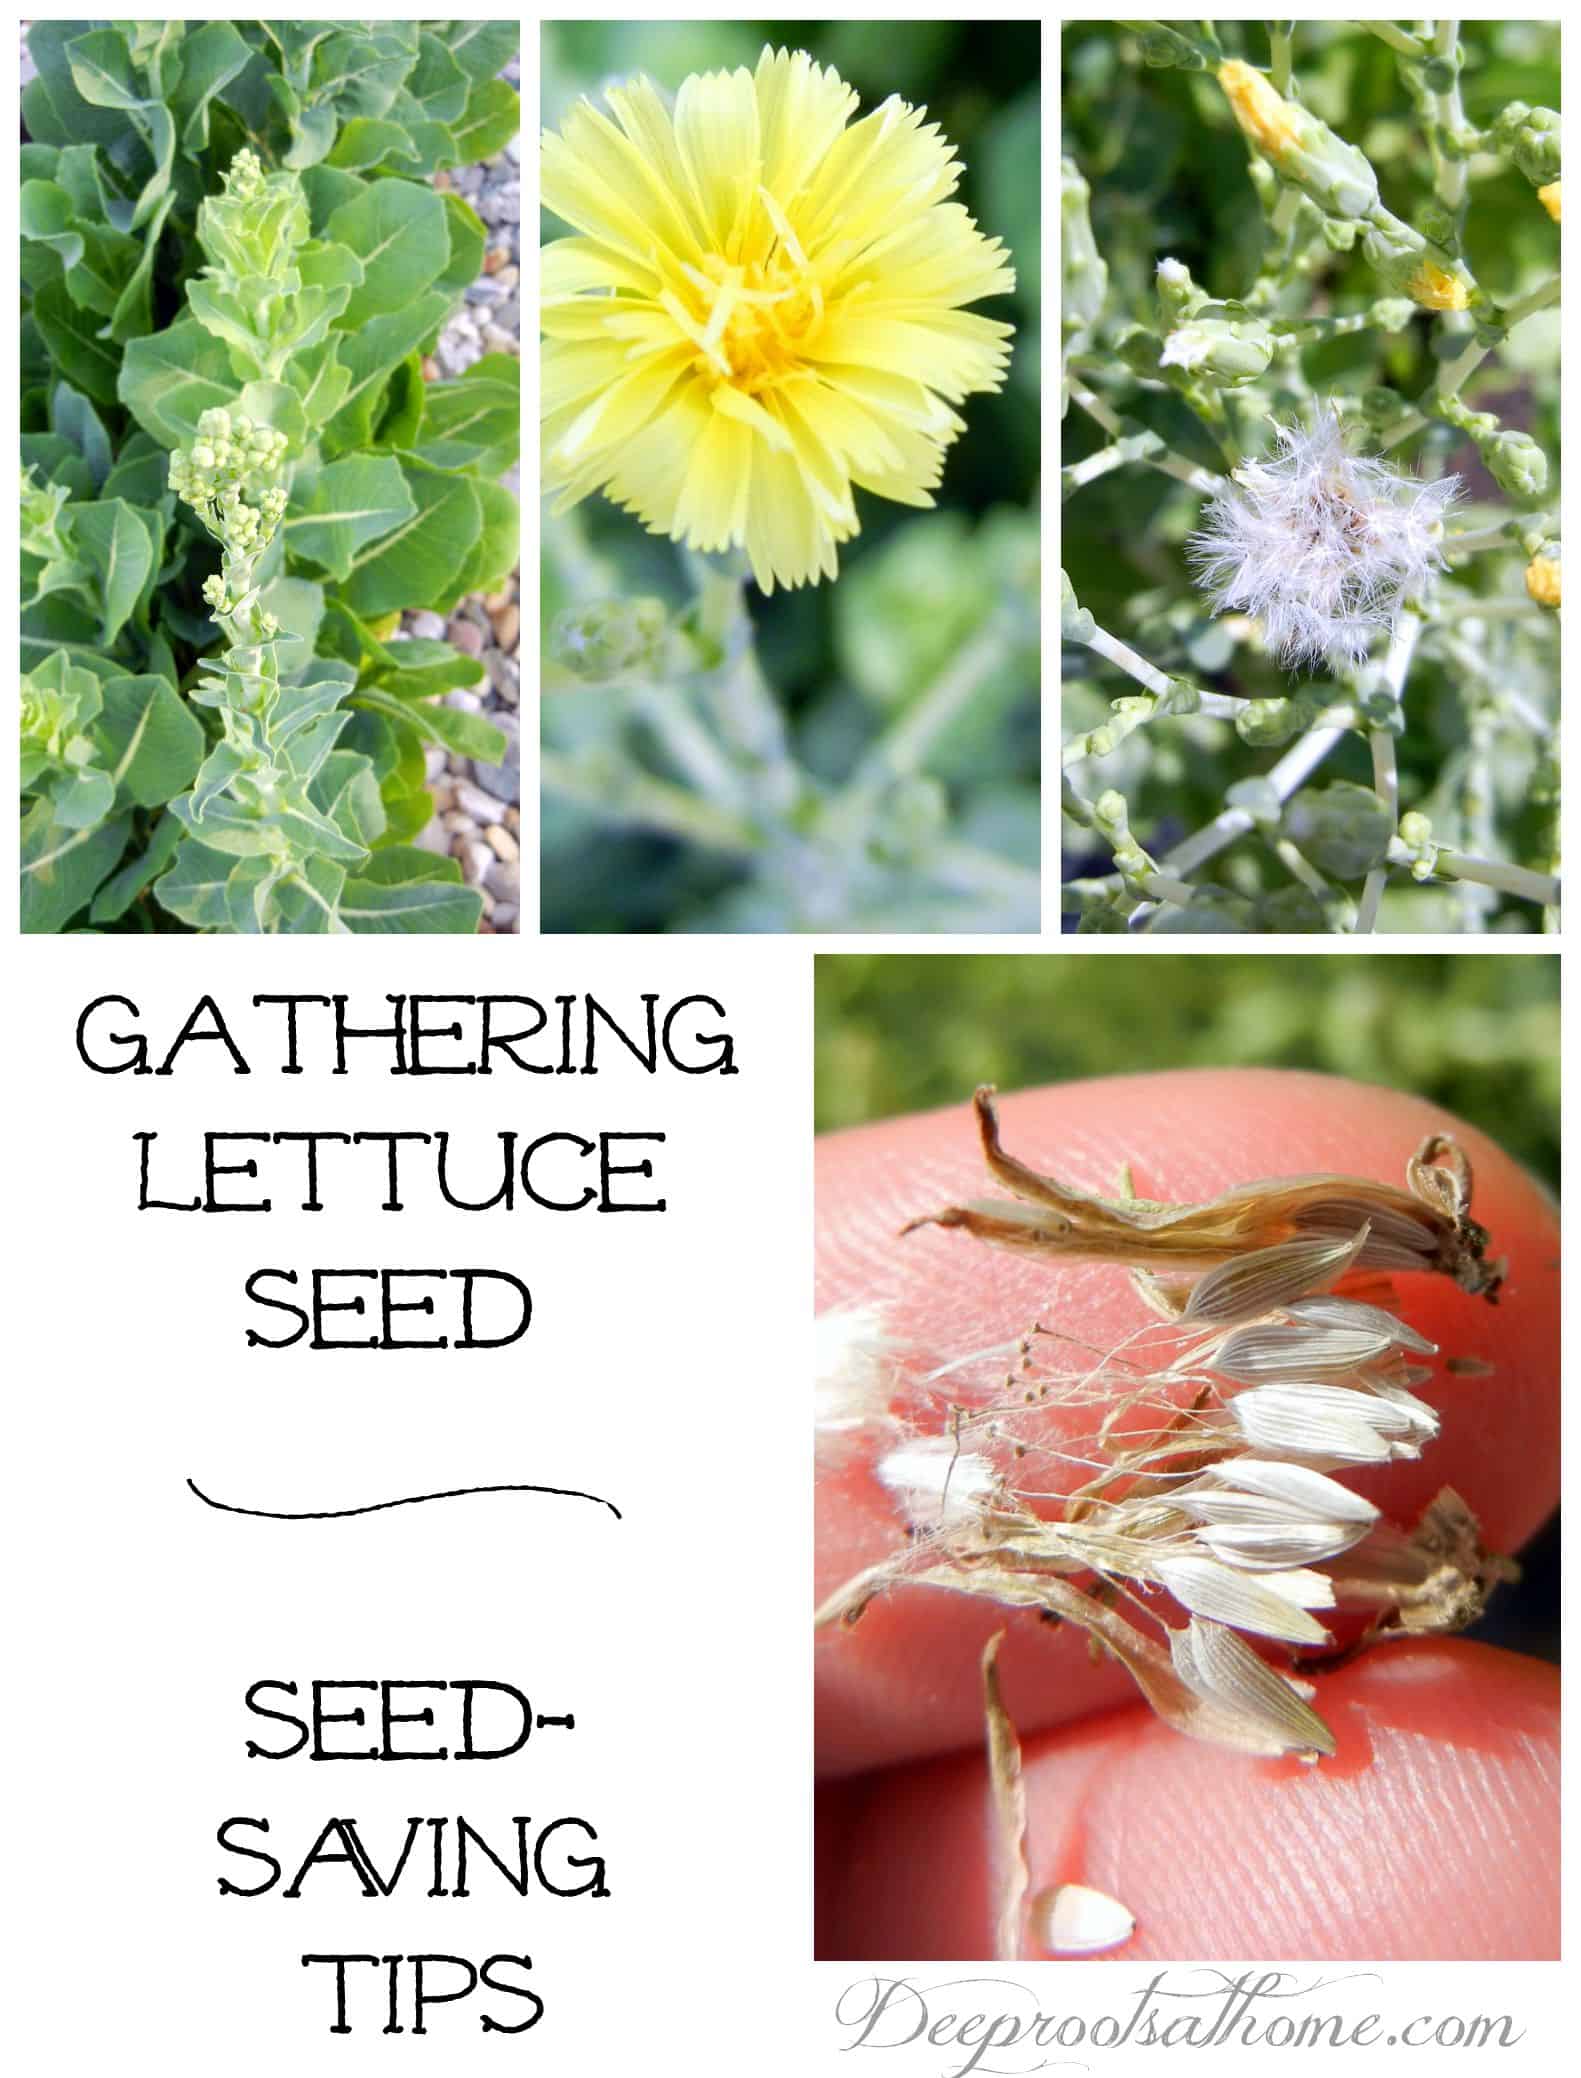 Gathering Lettuce Seed ~ Seed Saving Tips, flowers, adventure, science, thrift, preparedness training, culinary arts, living simply and responsibly, teach your children, pass on a heritage, sustainable skills, next generation, save money, frugal living, sustainable, homesteading, following God's natural plan, growing things, germination, growth, fruit bearing, prepared, proactive, your families needs, produce, no chemicals, no GMOs, full of nutrients, rich soils, tastes great, Vivian Romaine, Burpee seed, bolting, past its prime, spent plants, flower stalks, blooms, sap, sticky, when to pick, release seed, scattering seeds, spinach seed, celery seed, dill seed, herbs, herbal gardening, drying, recording date, keeping a log, keeper of the home, homemaking, homemaker, planting, harvesting, watering, collecting, Romaine lettuce, Caesar salad, salad fixings, gardening, September, fall garden, cool weather crops, 